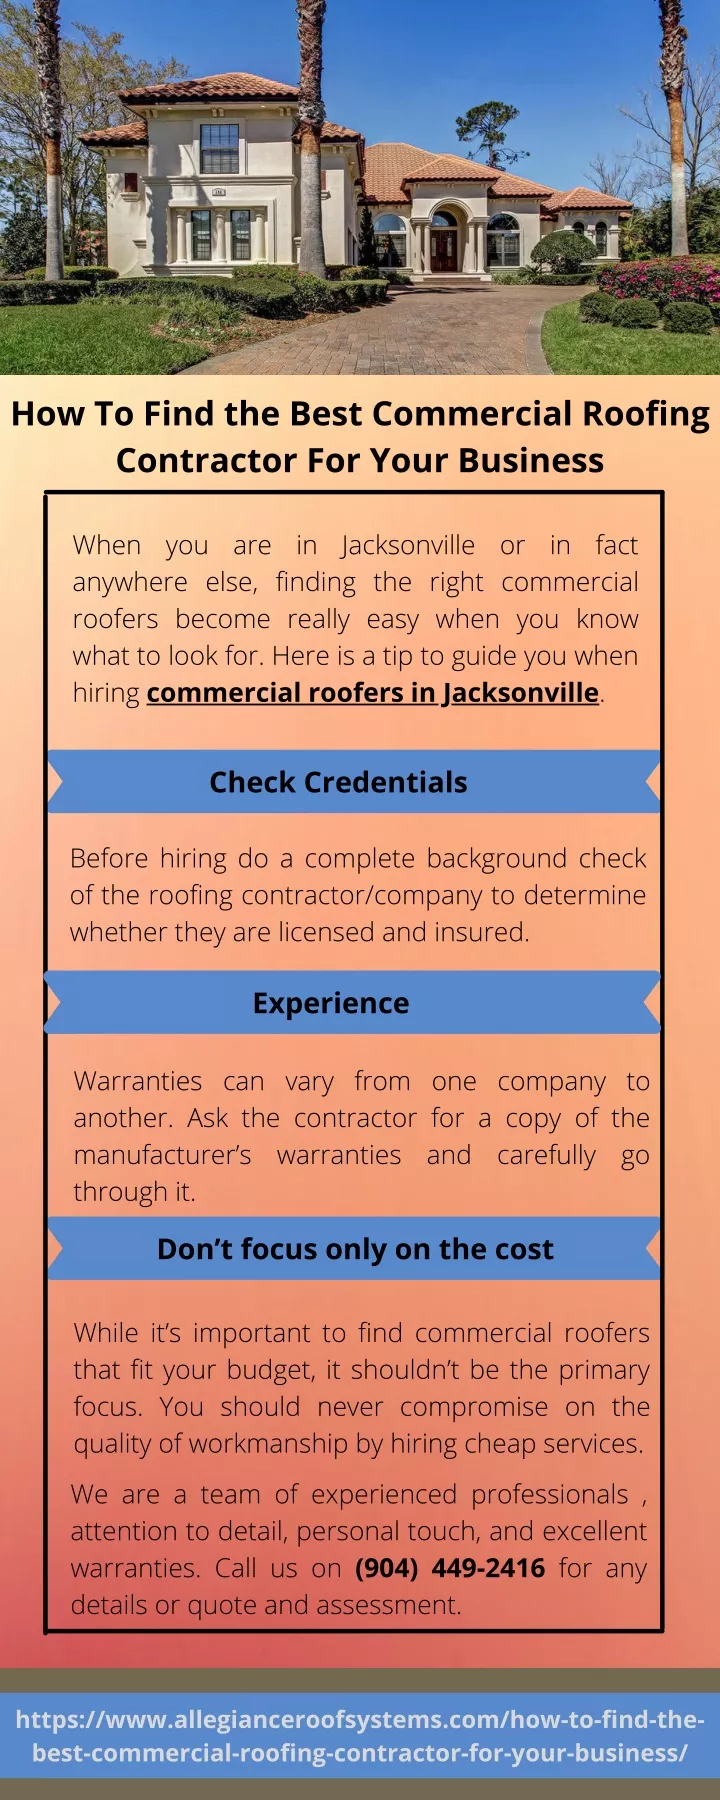 how to find the best commercial roofing